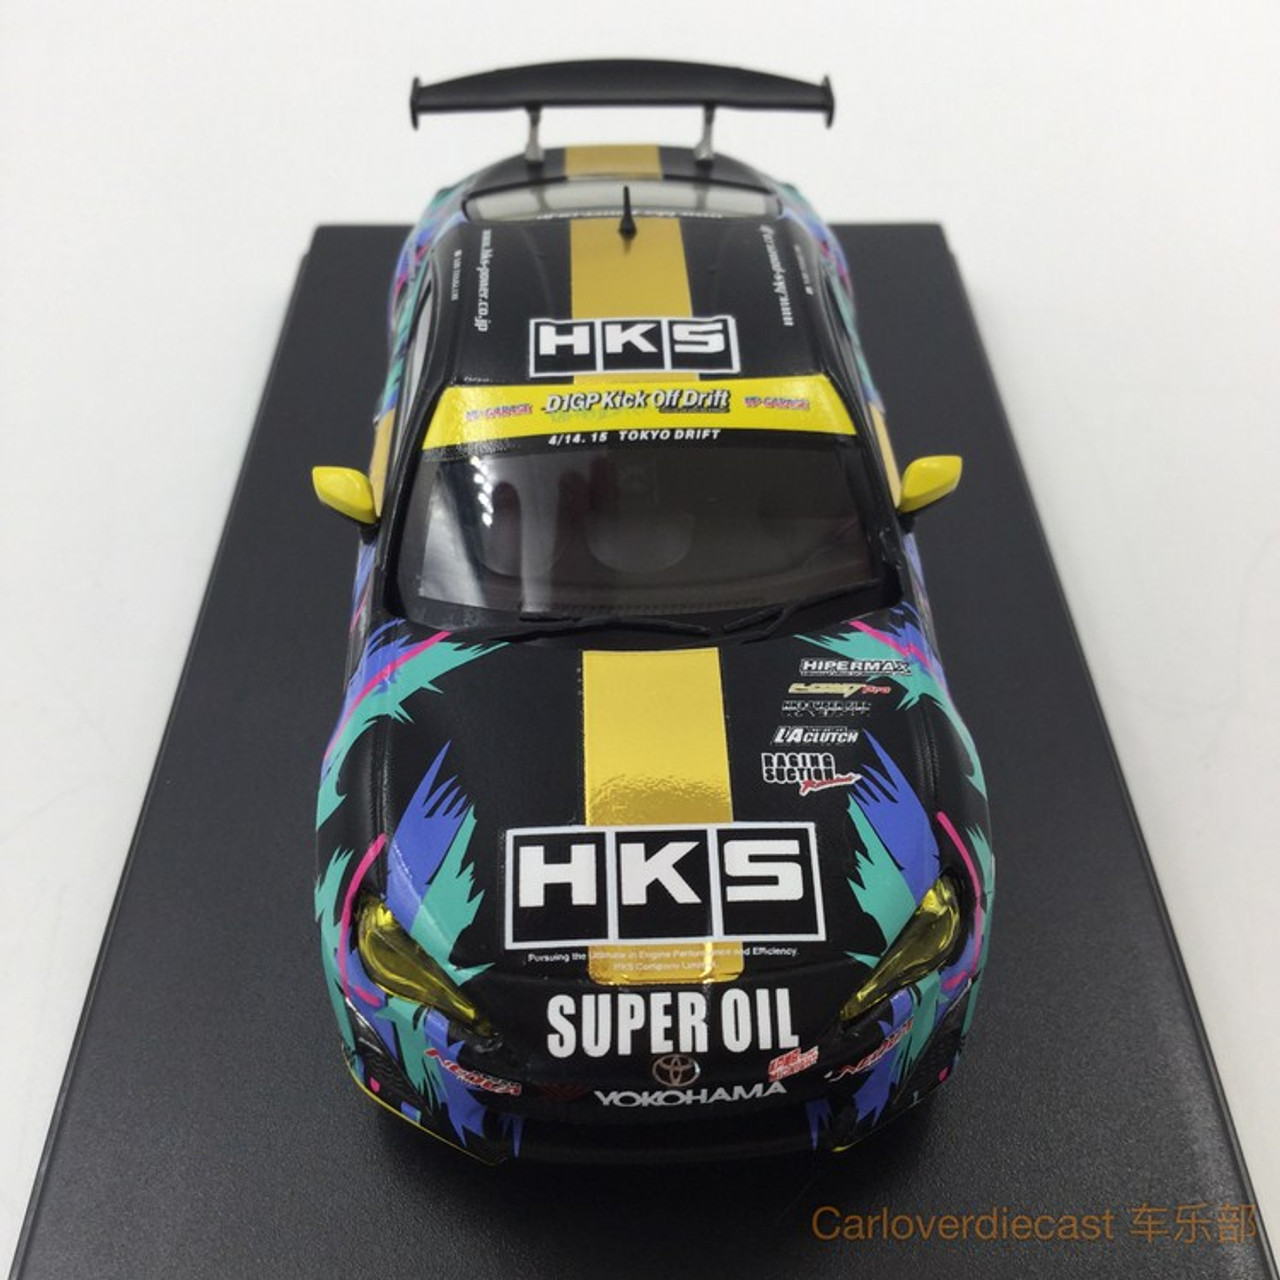  1/43 Toyota GT86 Tuned by HKS (Tarmac Works)